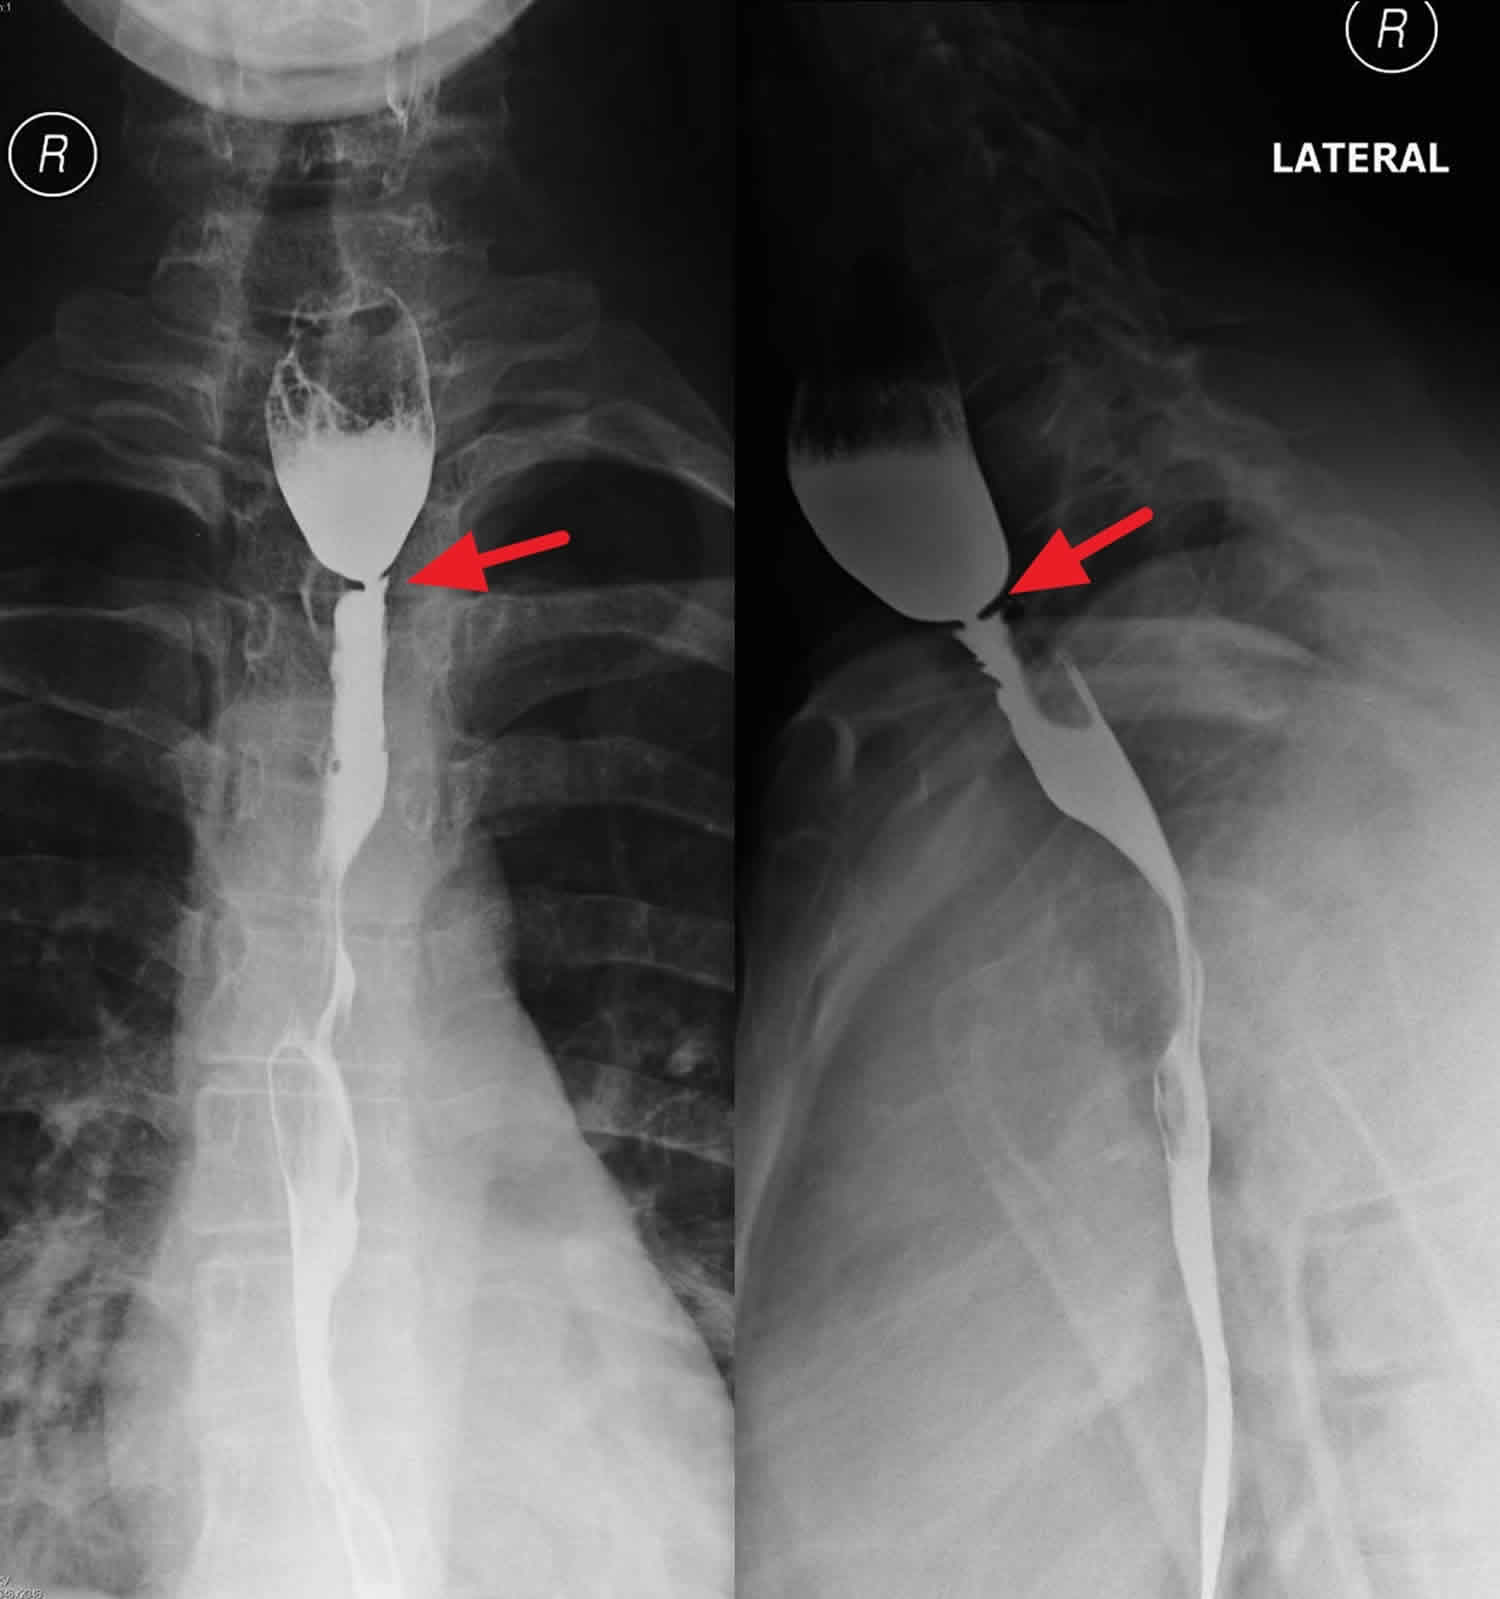 A simple physiological repair of diaphragmatic hernia